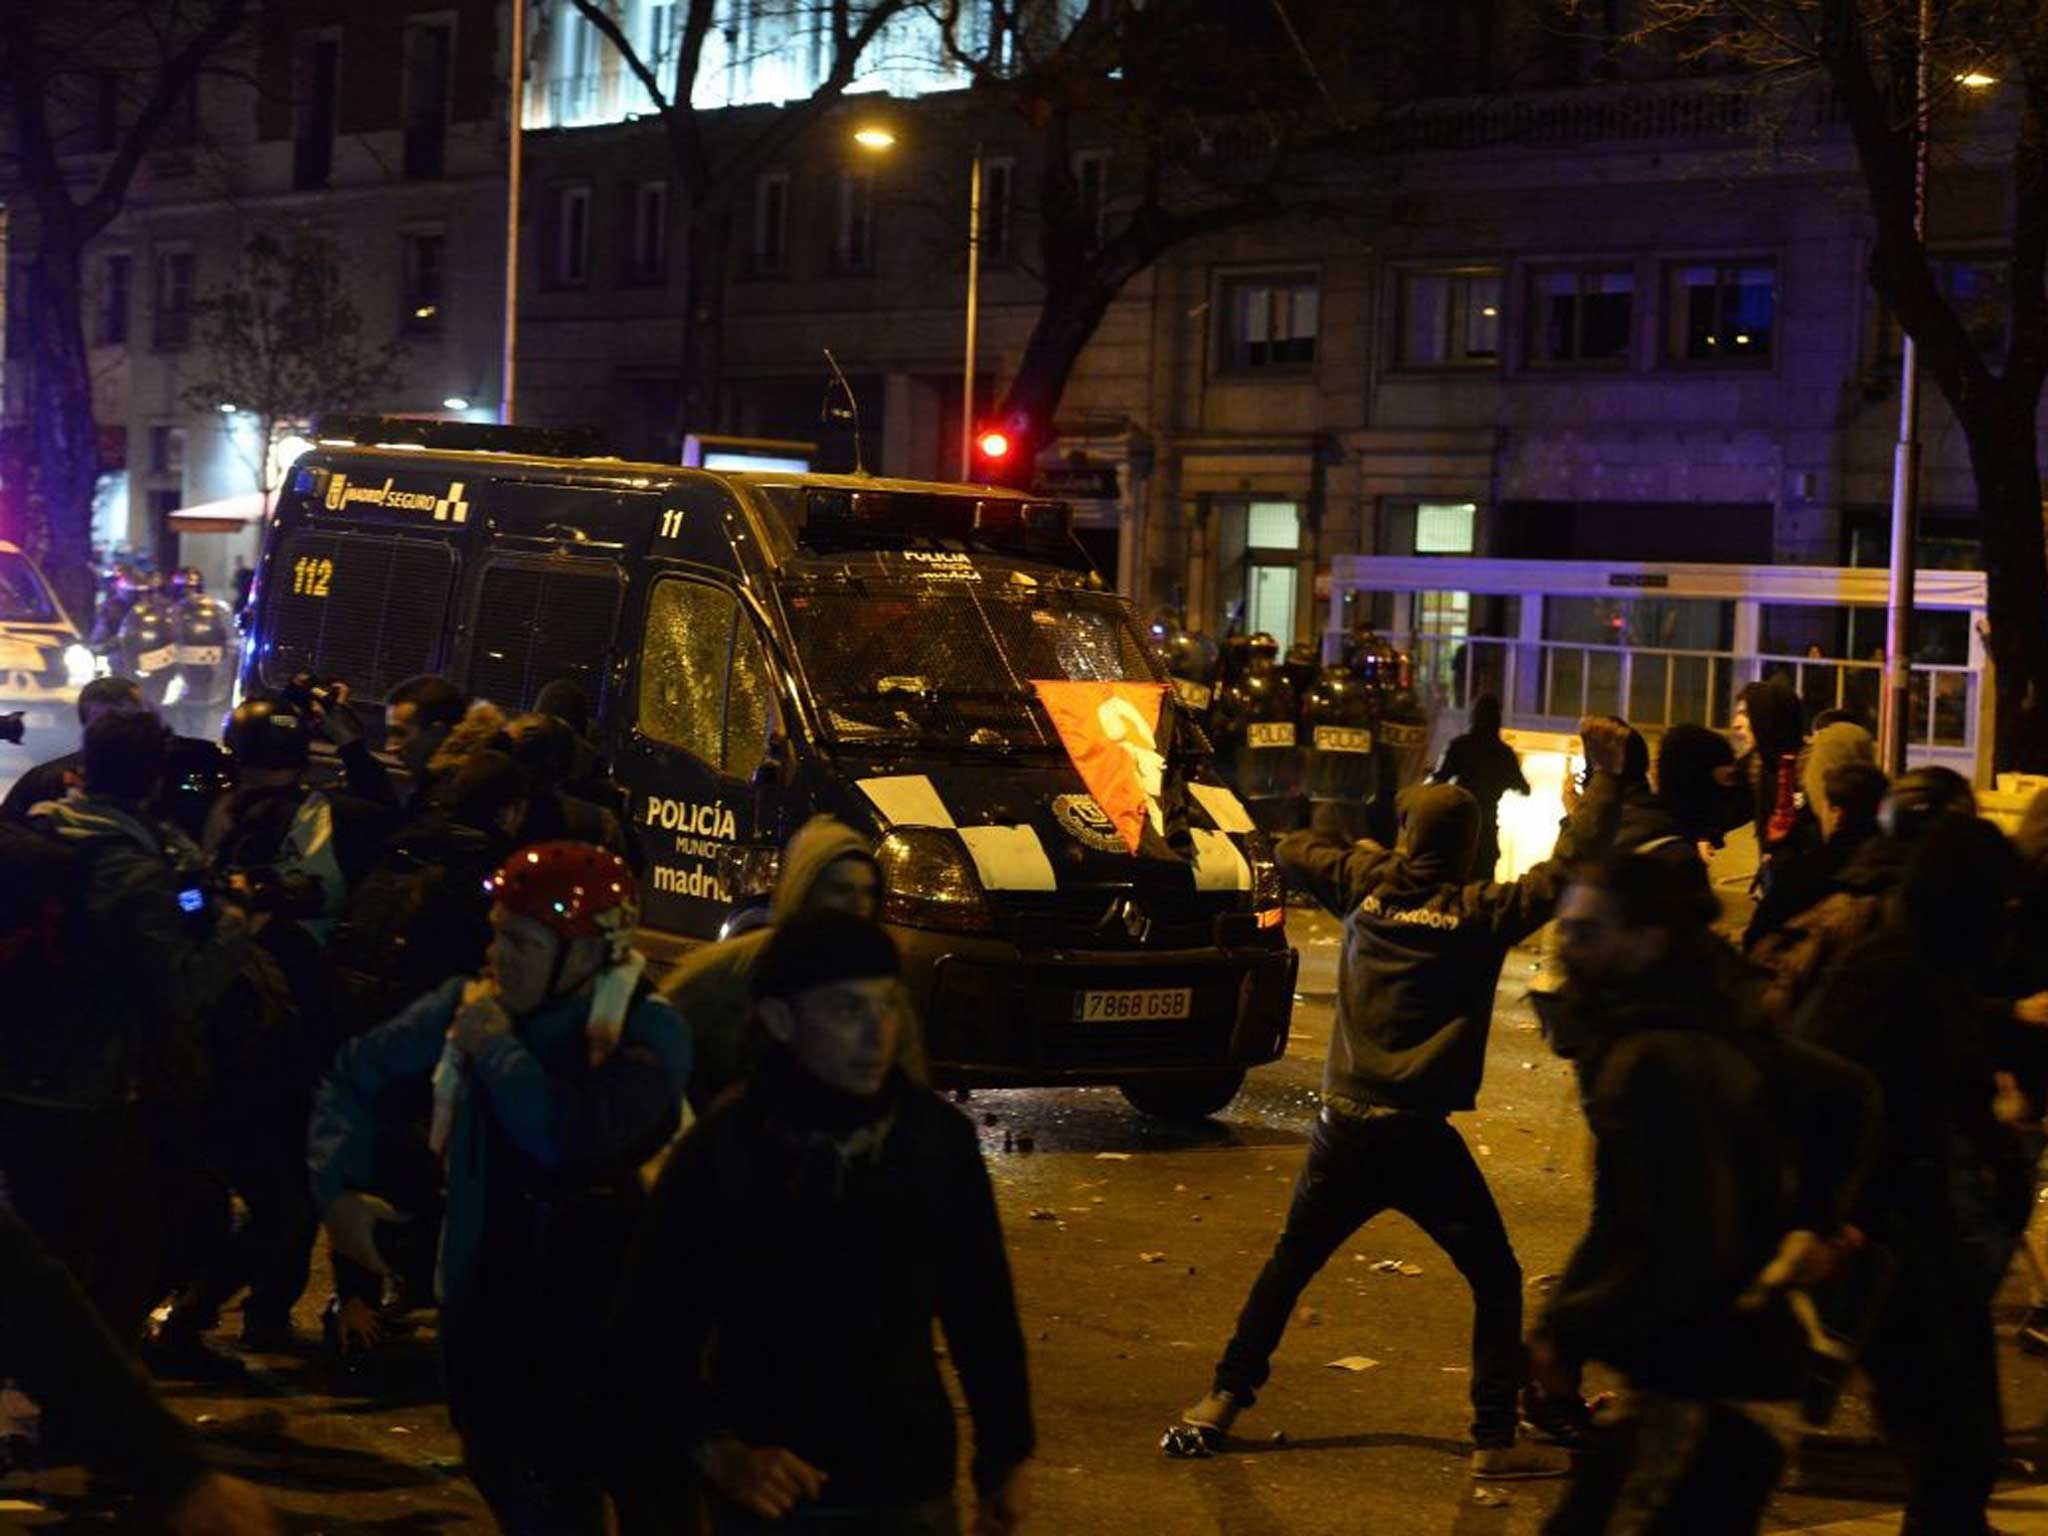 Demonstrators throw projectiles at a police van during clashes at the end of a march dubbed "the Marches for Dignity 22-M"